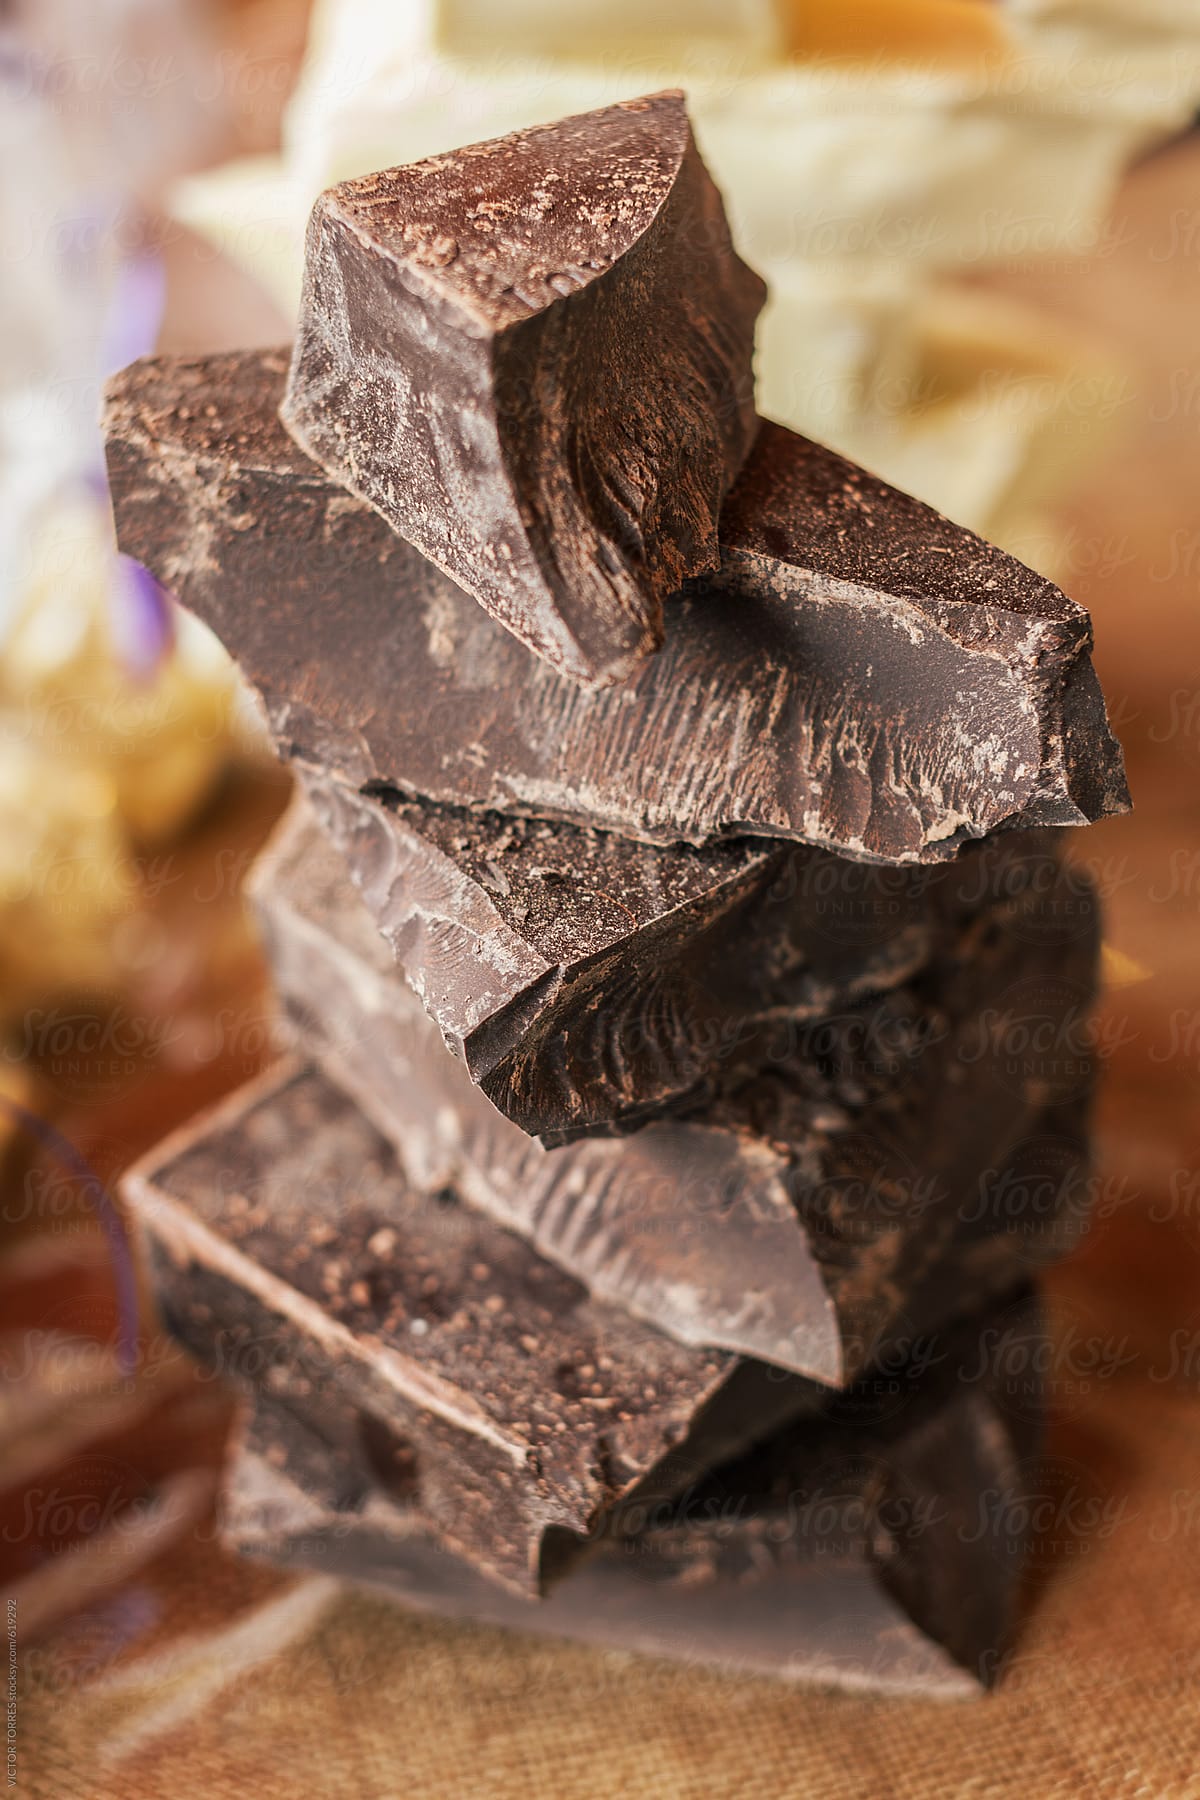 Blocks of Pure Black Chocolate in a Market Stall